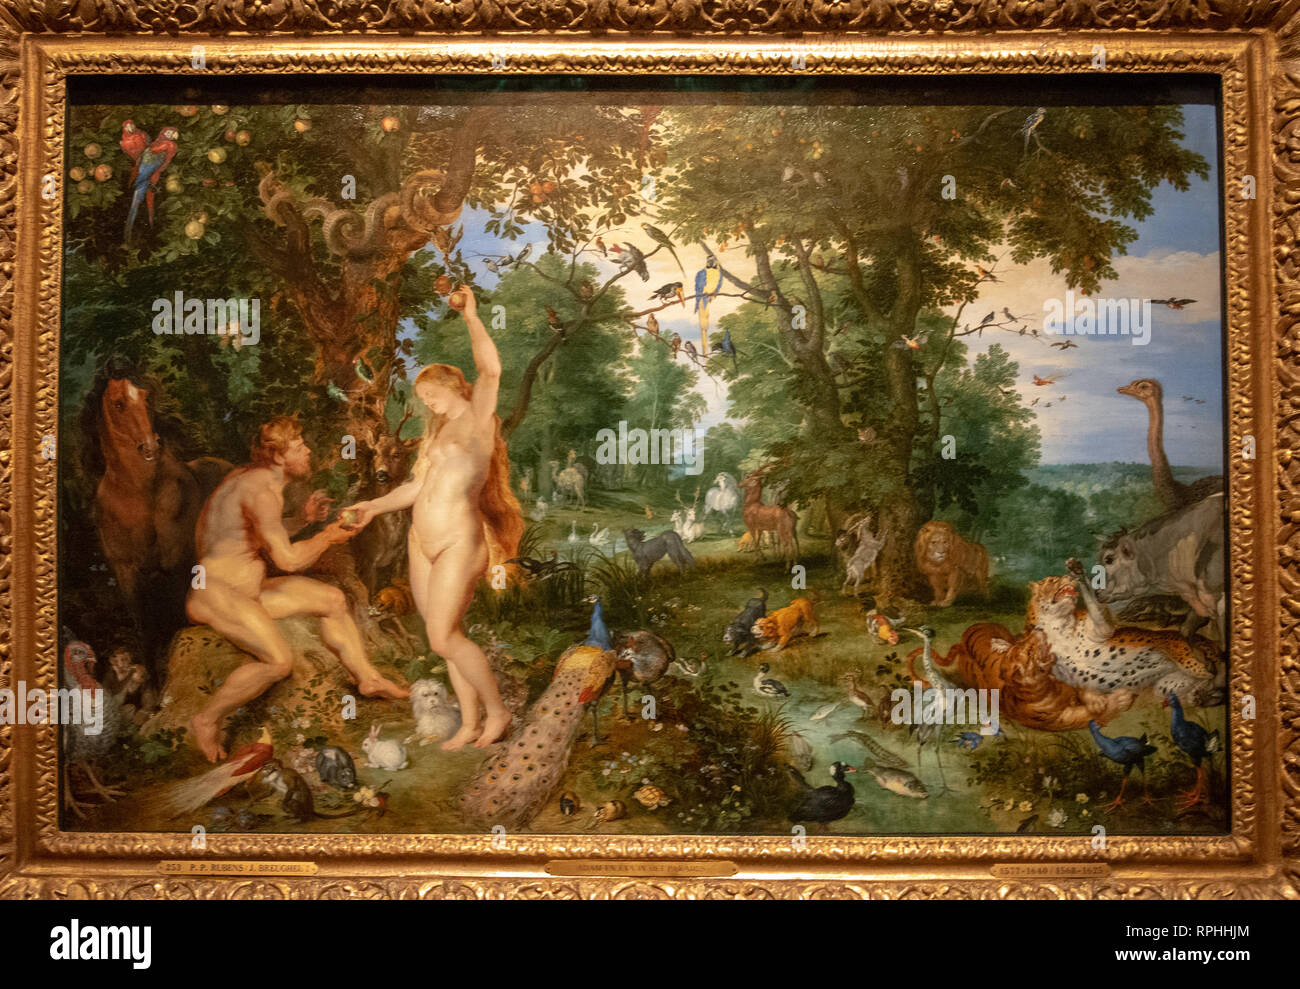 The garden of Eden with tyhe fall of man, by painters Peter Paul Rubens and Jan Breughel Stock Photo